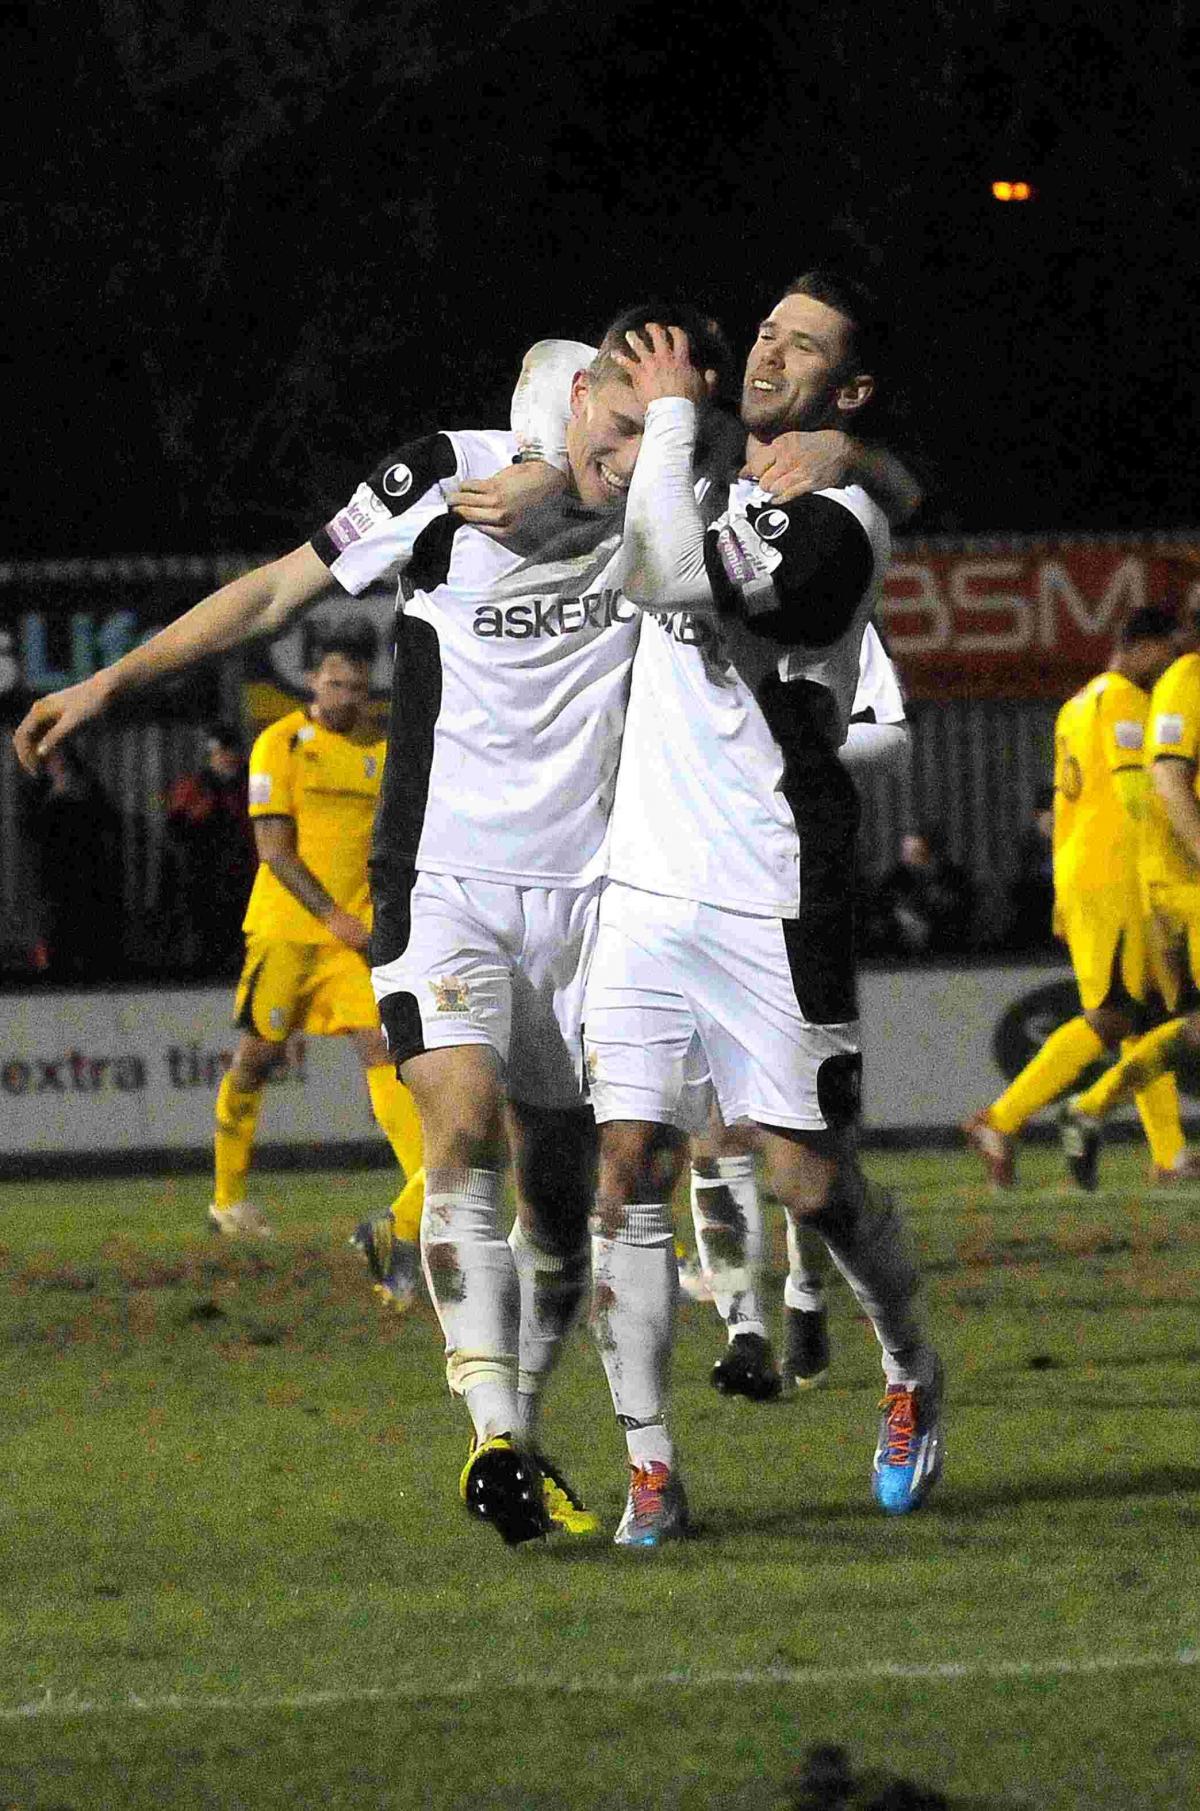 Salisbury come up trumps with victory over Woking to shoot back to the play-off zone.